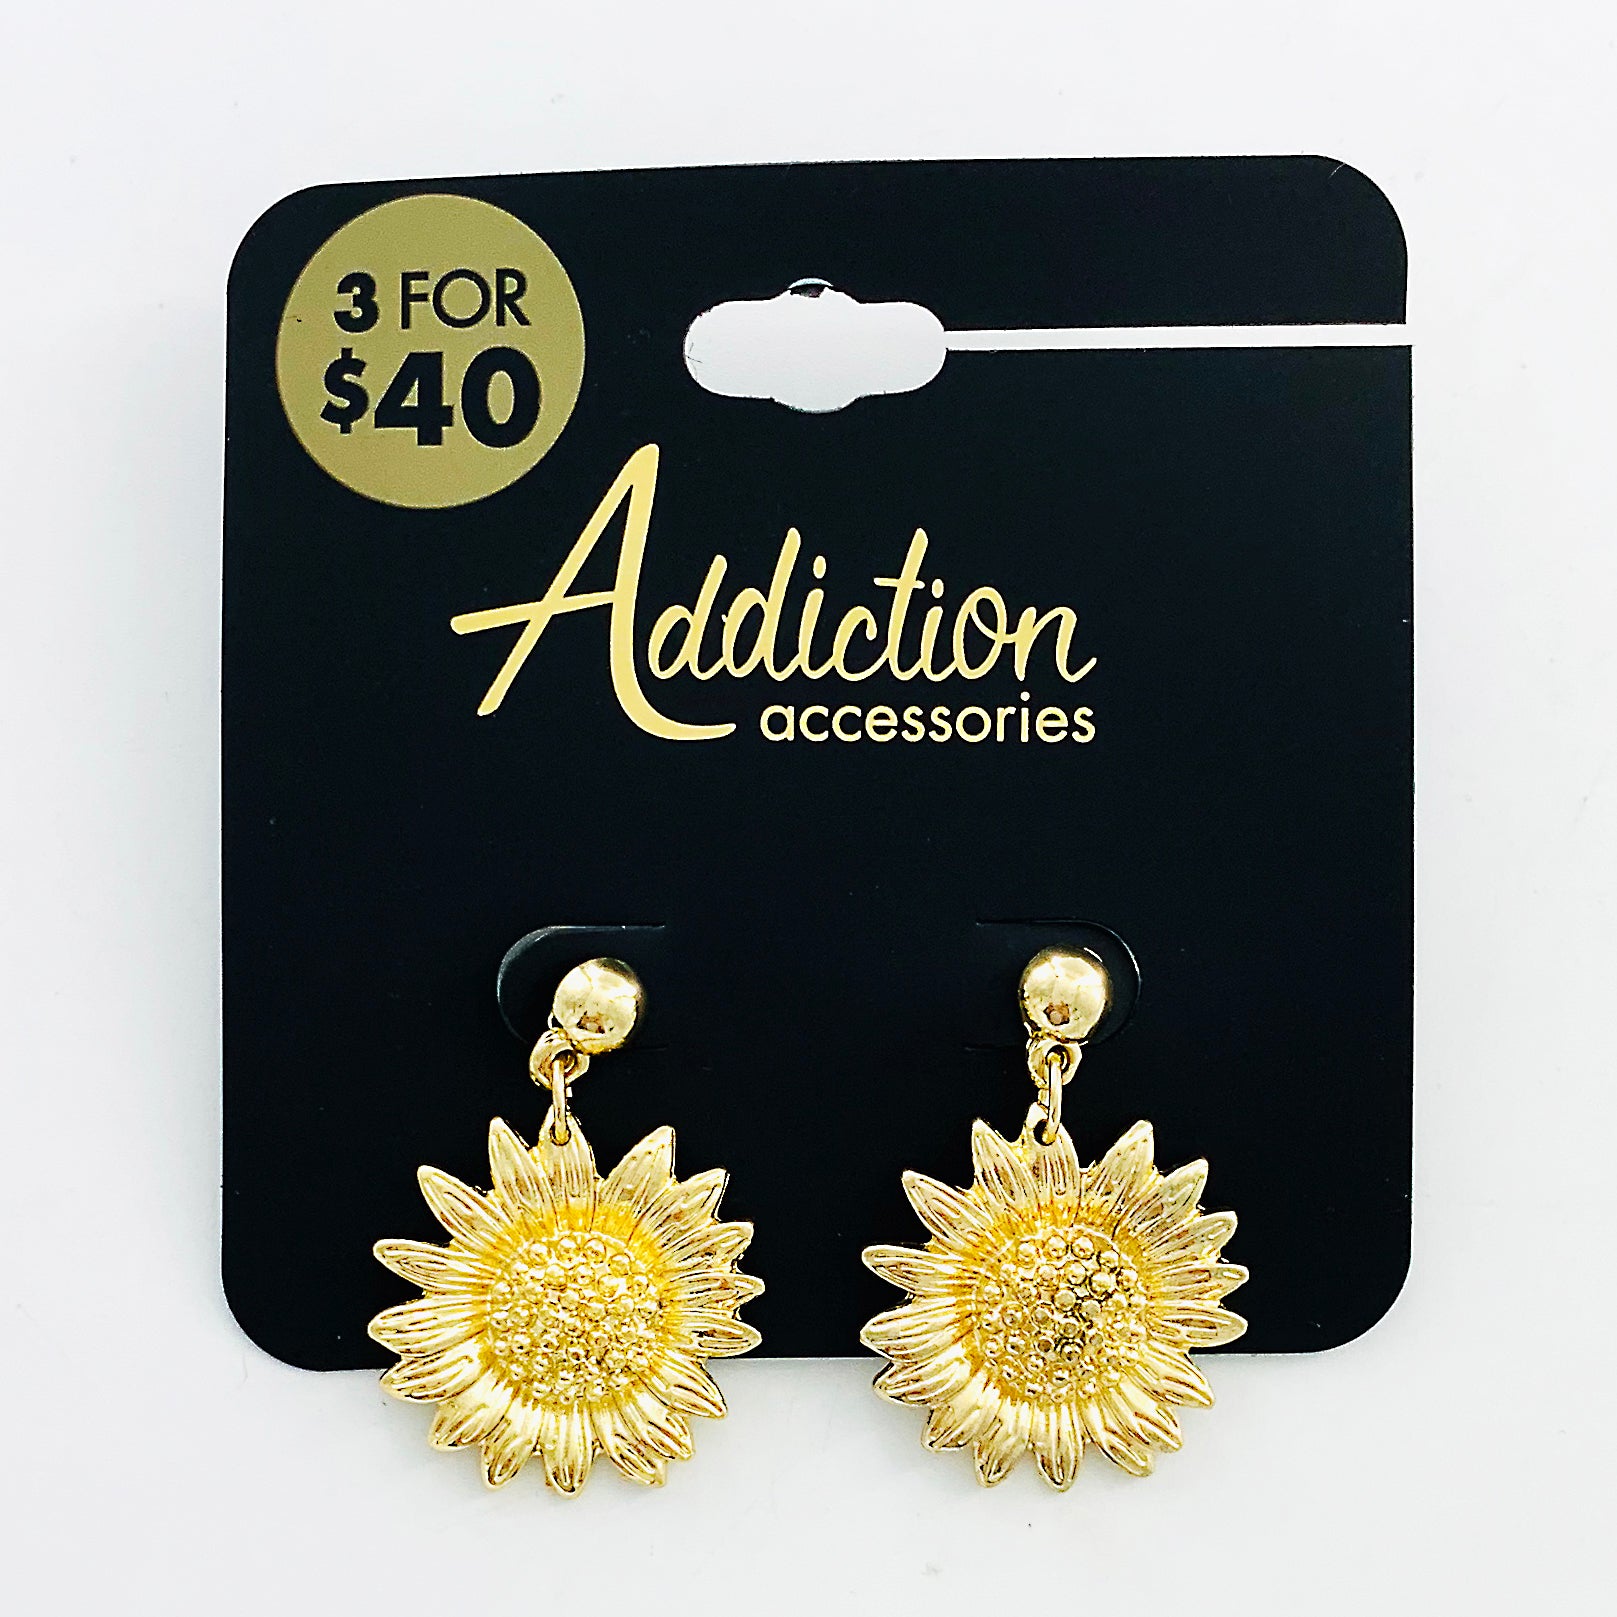 Gold metal earrings with sunflower design